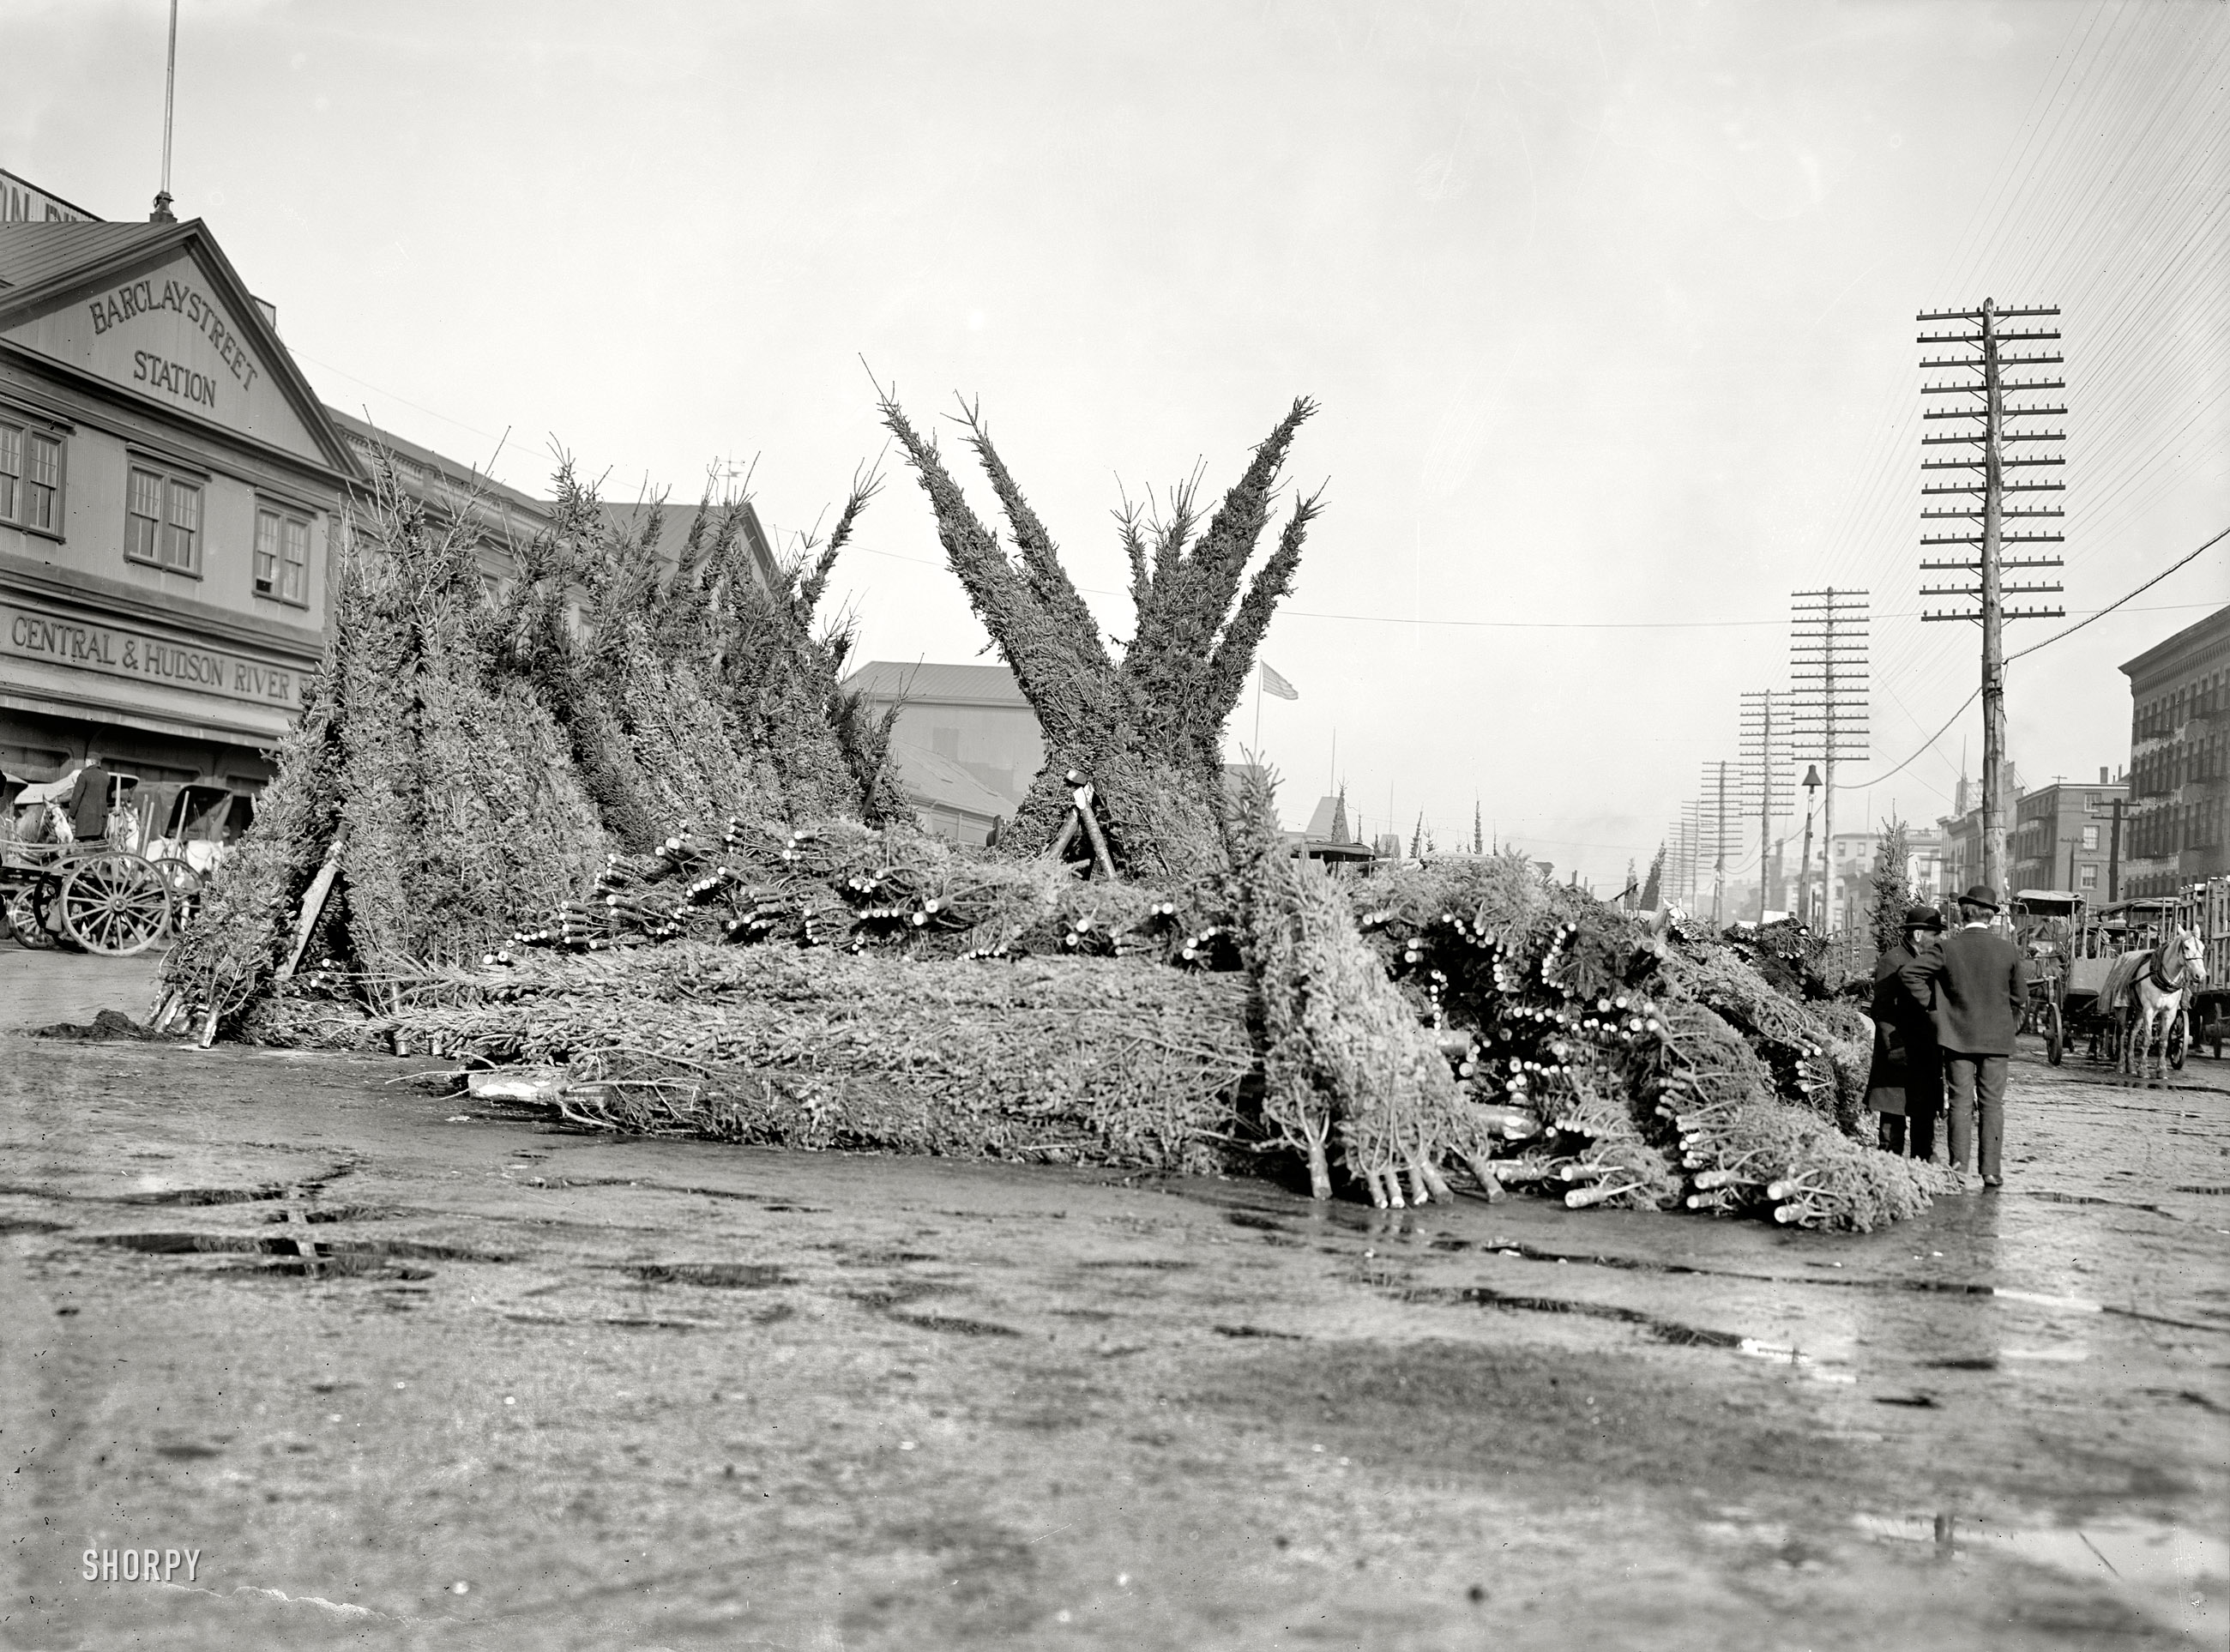 New York circa 1903. "Cut Christmas trees at market in front of Barclay Street Station." May all your Christmases be bright and all your ceilings be tall. 6½ x 8½ inch dry plate glass negative, Detroit Publishing Company. View full size.